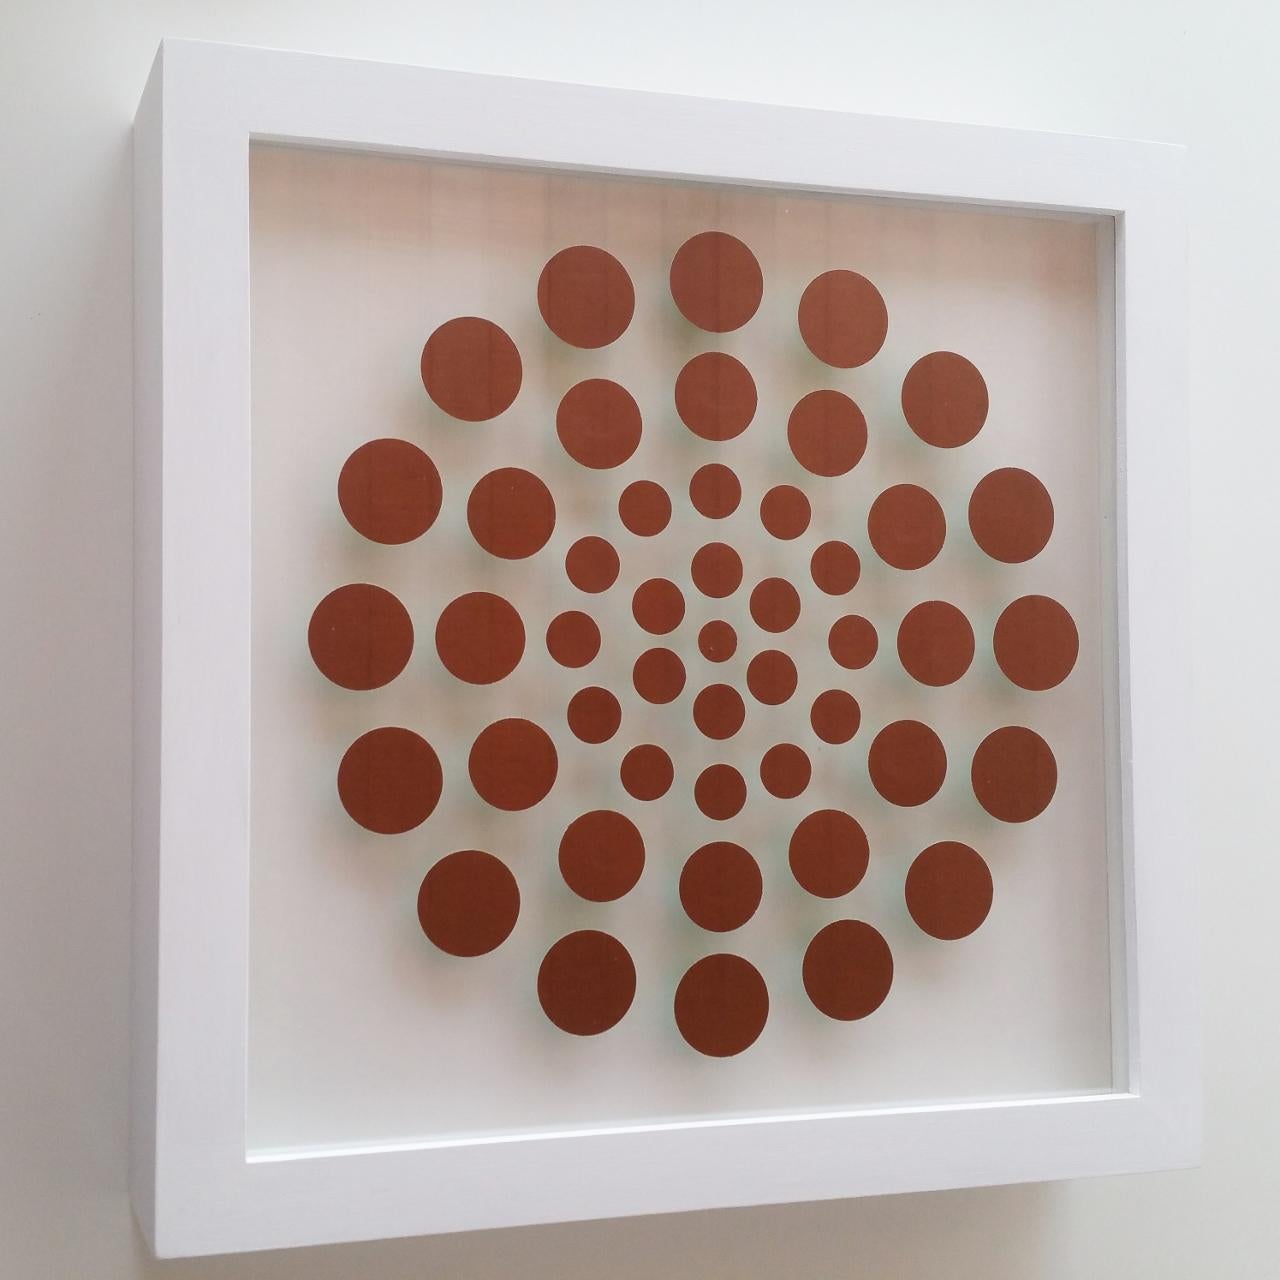 47 Dots V - contemporary modern abstract geometric paper relief - Gray Abstract Painting by Eliza Kopec